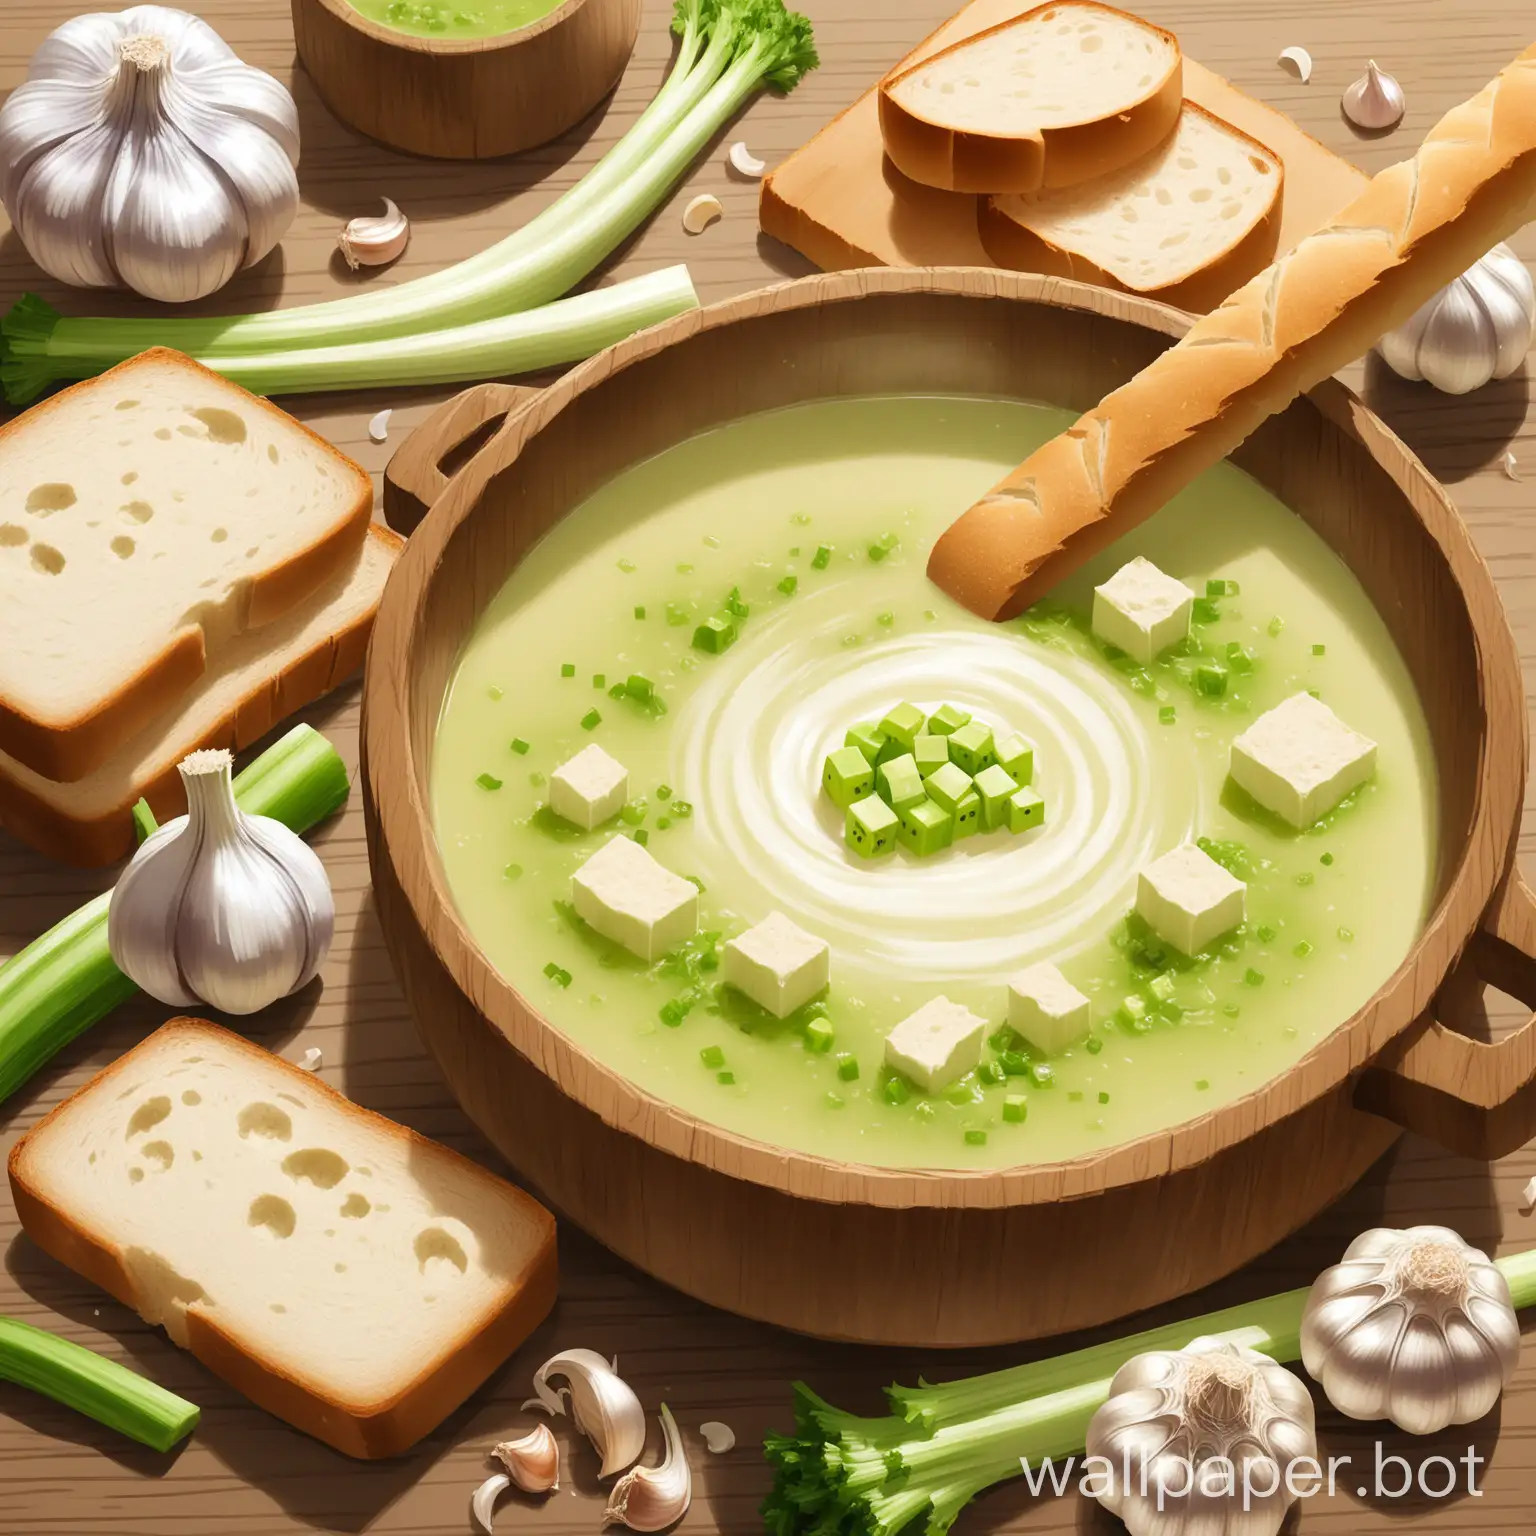 Rustic-Kitchen-Scene-Cooking-Creamy-Celery-Soup-with-Freshly-Baked-Bread